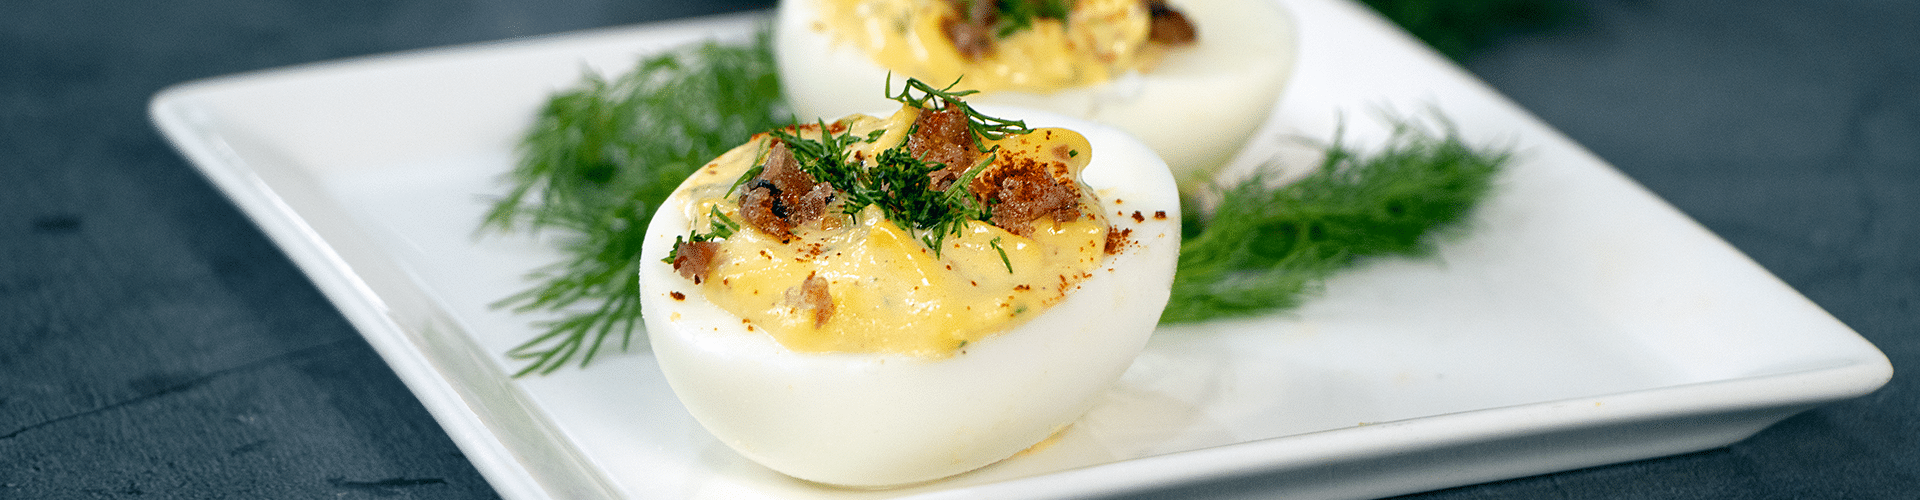 gluten free dairy free candied bacon and scallion deviled eggs full final